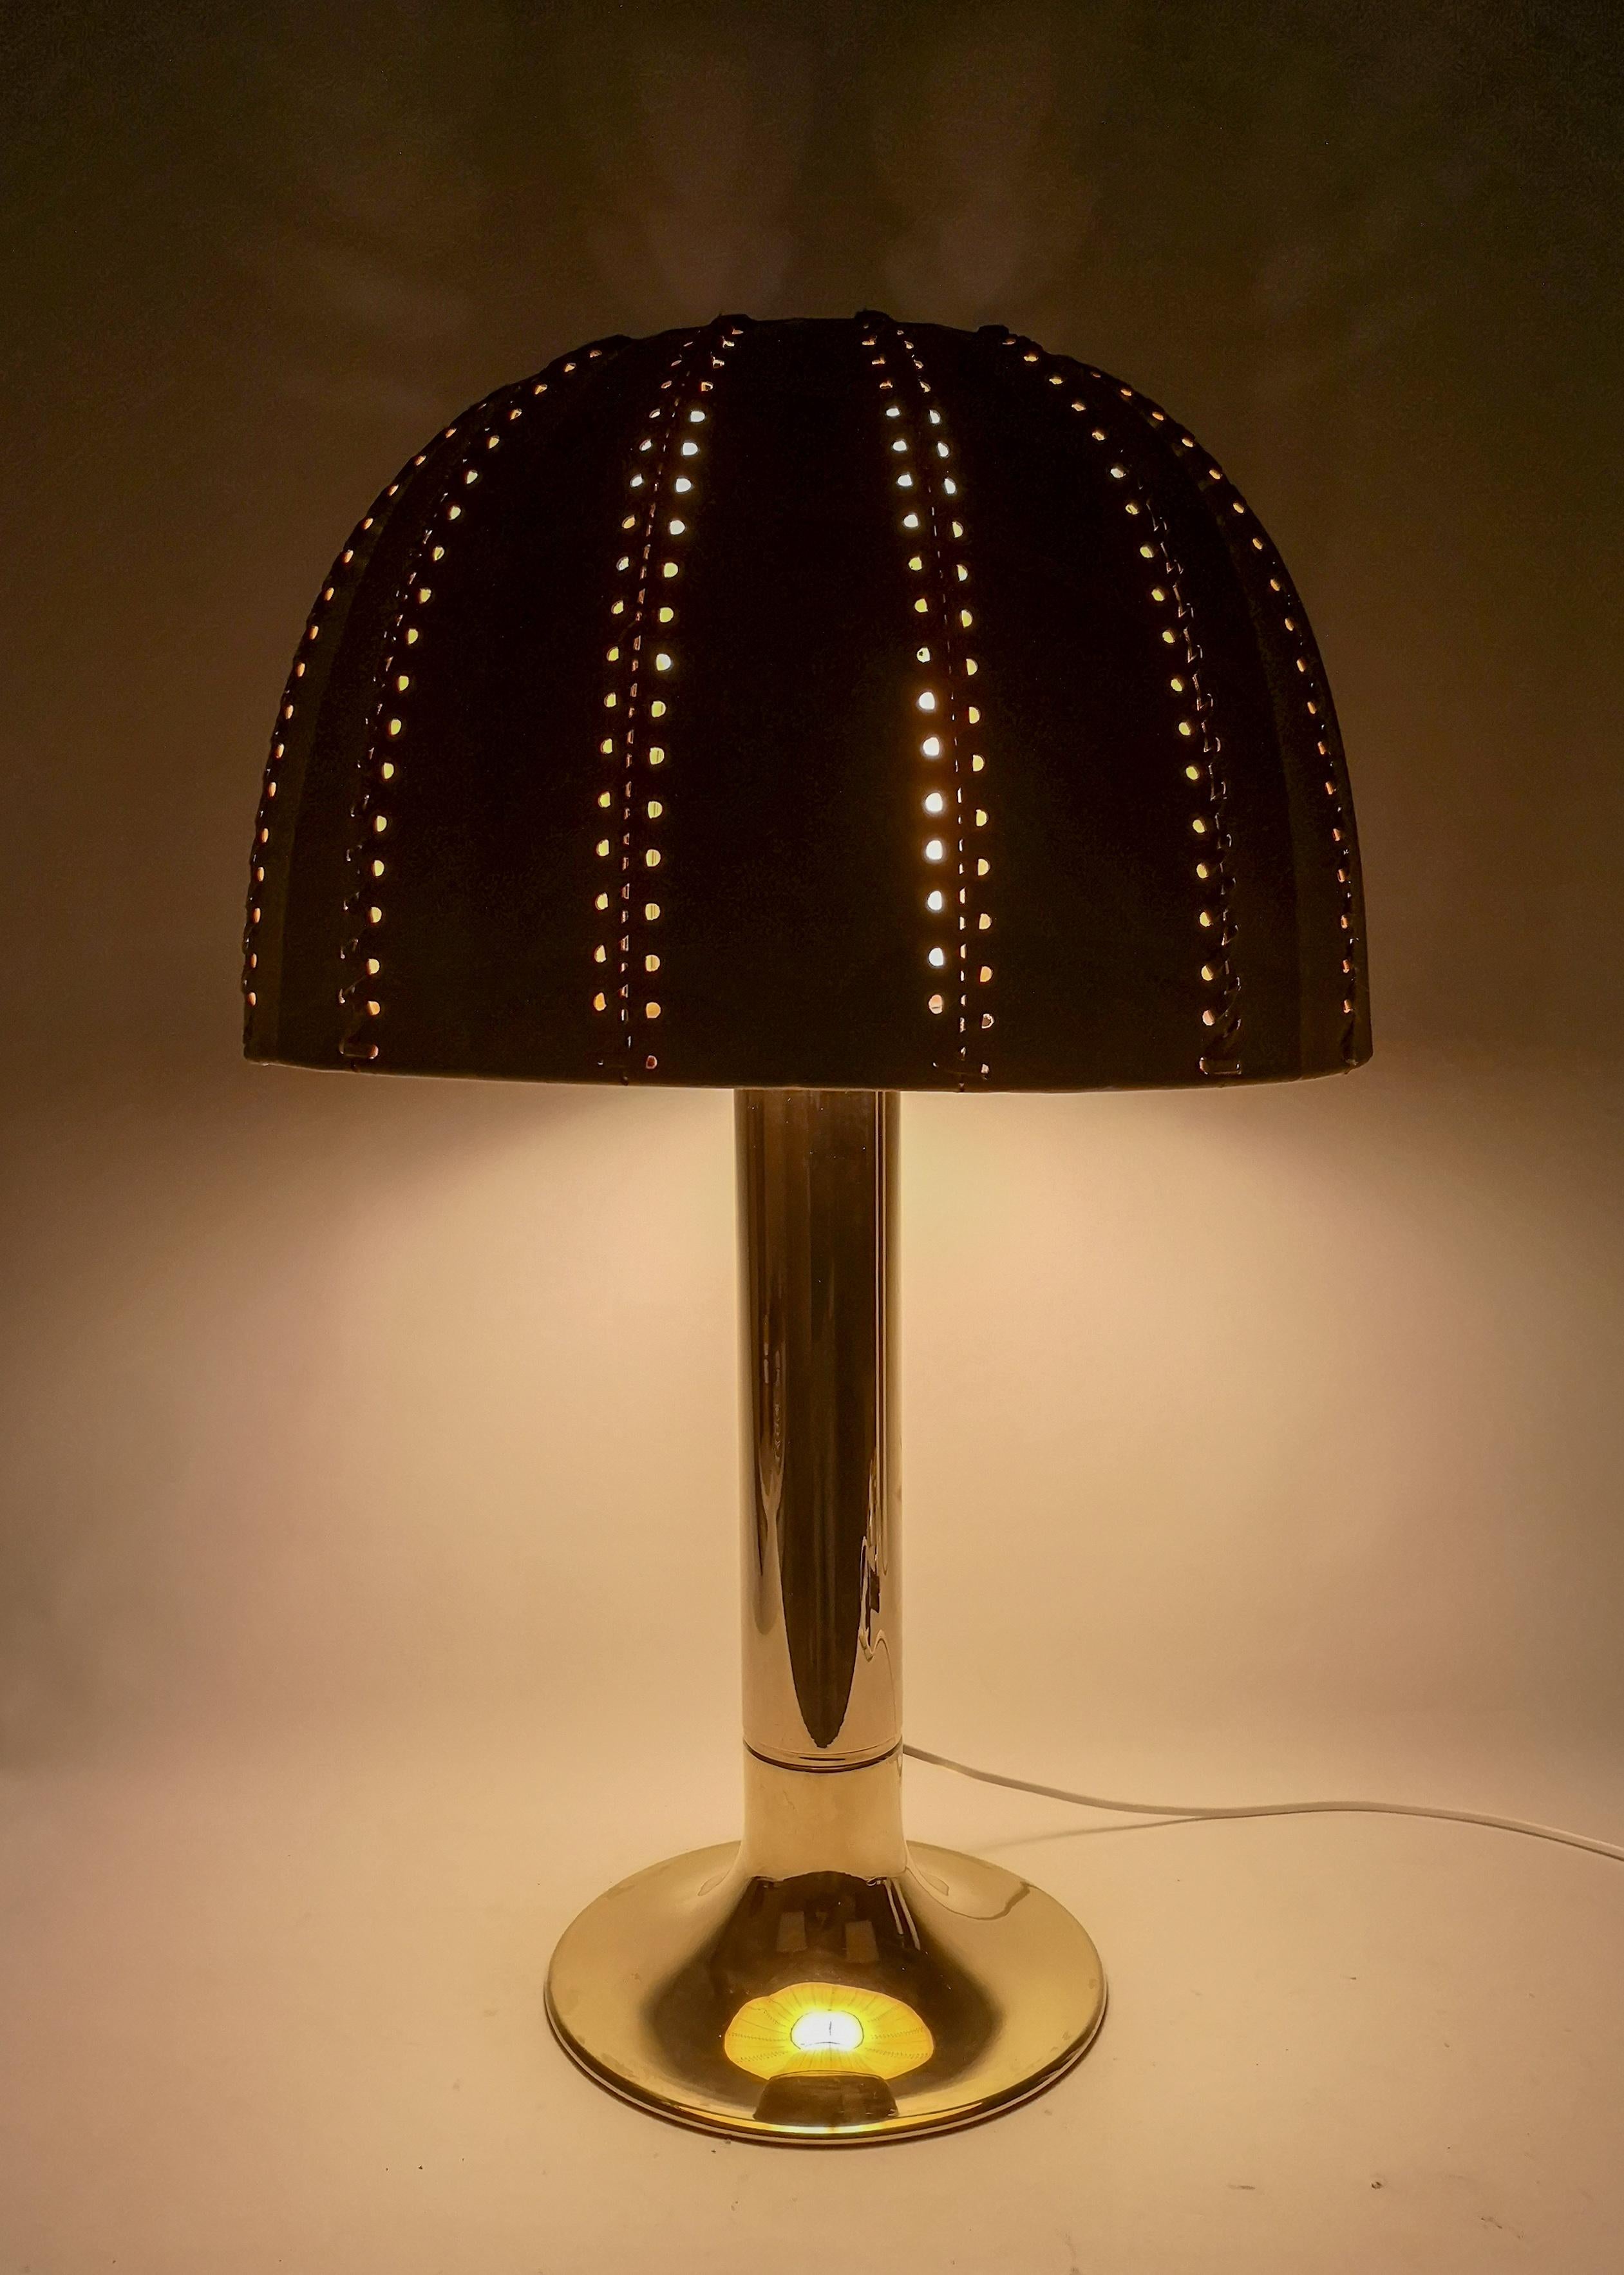 A stunning table light with brass base and a beautiful handstitched leather shade designed by Hans-Agne Jakobsson in 1963. At some point this extremely limited version of the Carolin table light was made, it was normally made with at textile